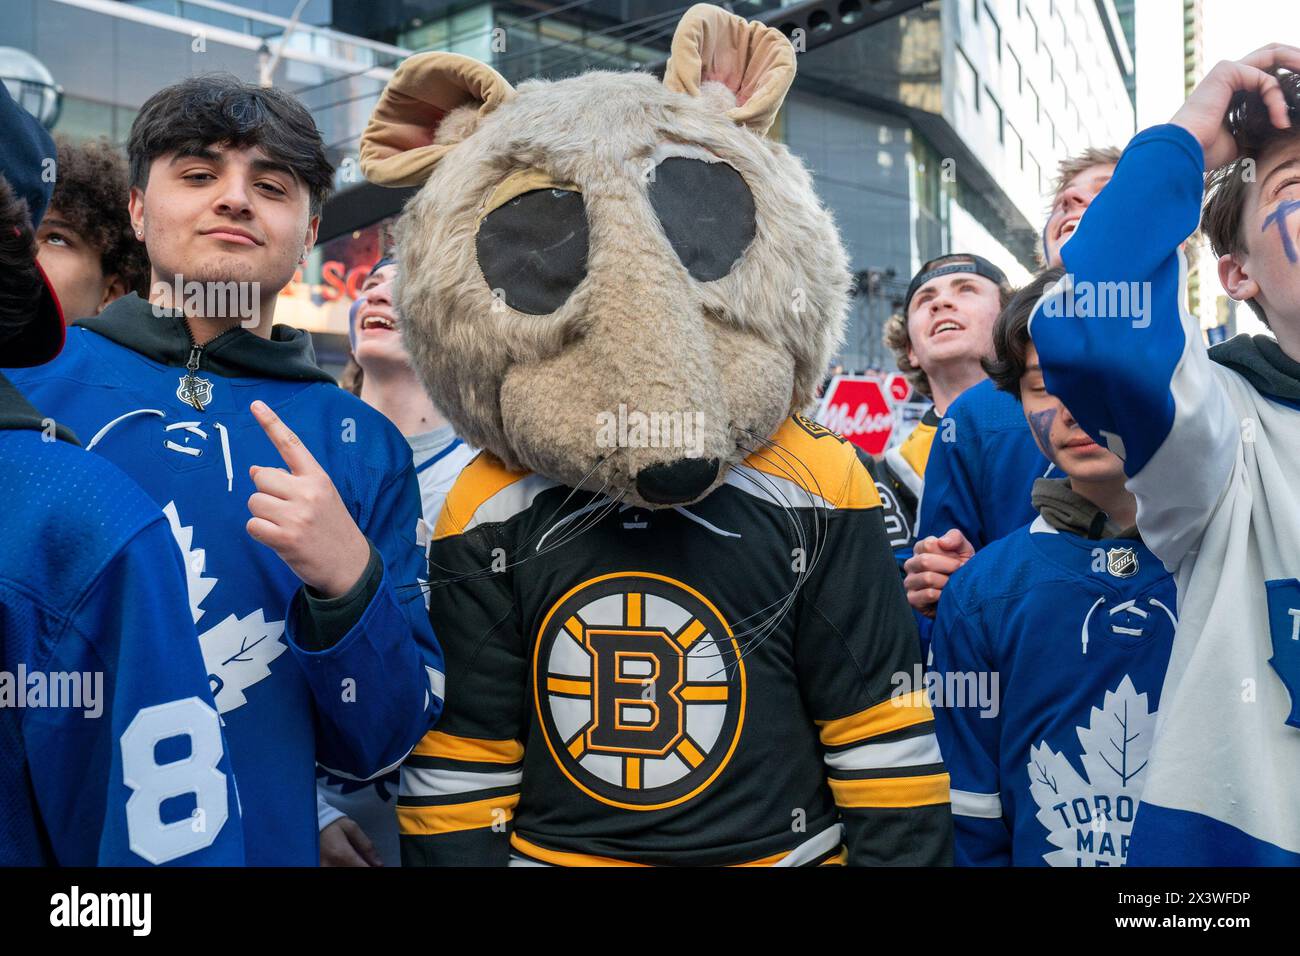 April 24, 2024, Toronto, Ontario, Canada: Fan dressed as Boston Bruins mouse at Maple Leaf Square outside Scotibank Arena, watching Round 1, Game 4 playoff game of Toronto Maple Leafs vs Boston Bruins playoff game on a giant screen. During Toronto Maple Leafs playoff games, Maple Leaf Square transforms into a sea of blue and white, echoing with the chants of passionate fans eagerly rallying behind their team's quest for victory. The electric atmosphere radiates anticipation and excitement, creating unforgettable memories for both die-hard supporters and casual observers alike. (Credit Image: © Stock Photo